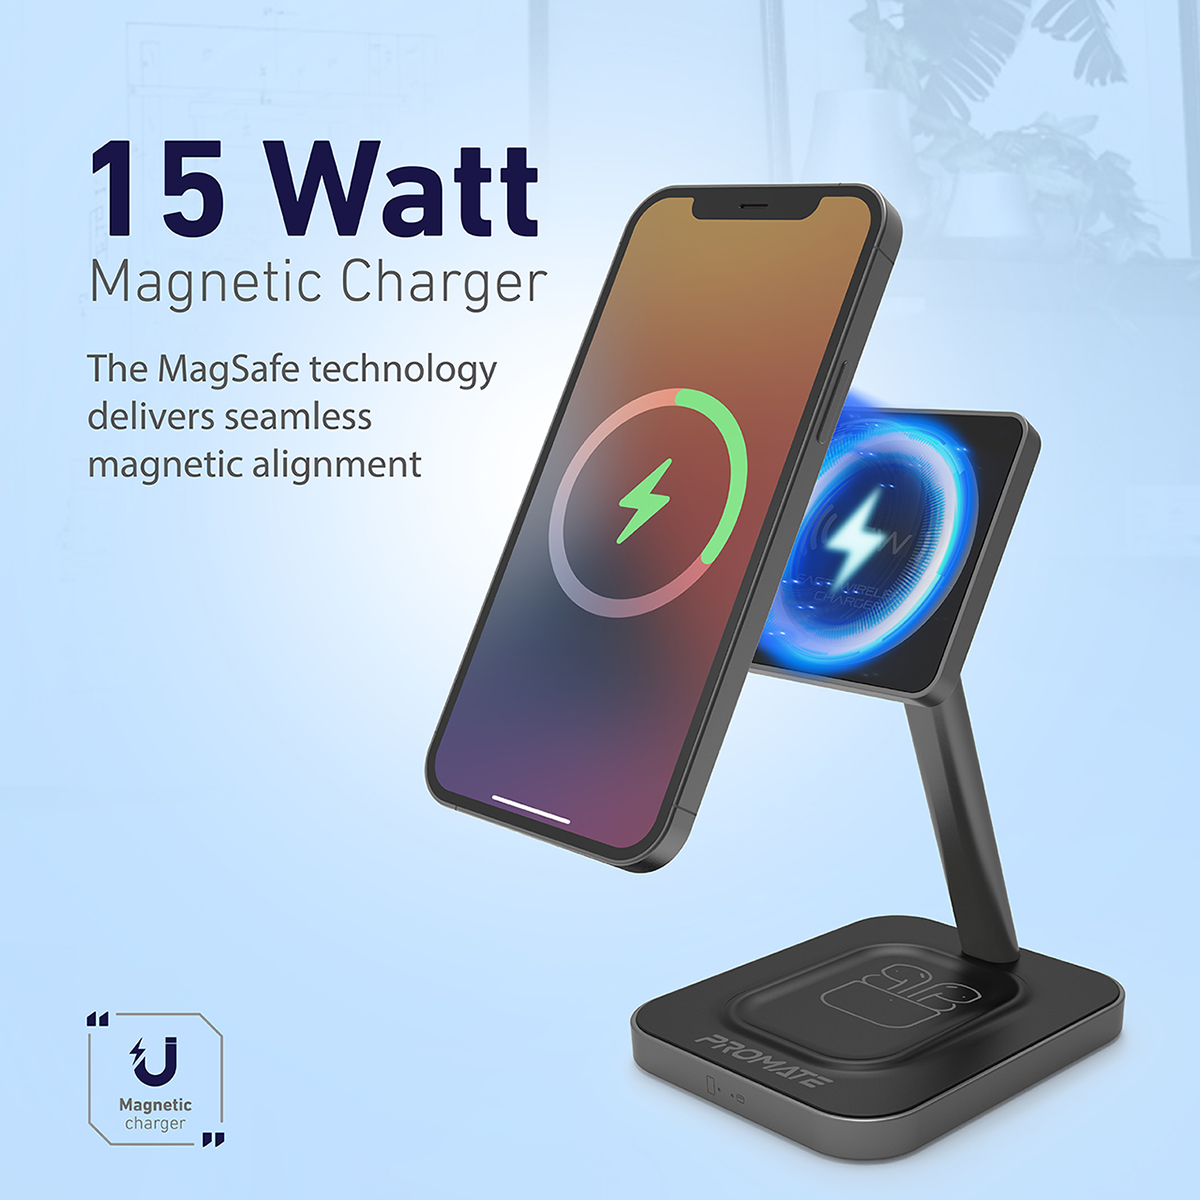 Promate Magnetic Wireless Charger for iPhone 12, 2-in-1 Mag-Safe 15W Fast Wireless Charger with Adjustable Neck and Anti-Slip 5W Charging Pad for iPhone 12/12 Mini/12 Pro/12 Pro Max/AirPods 2/AirPods Pro, AurBase-15W Grey